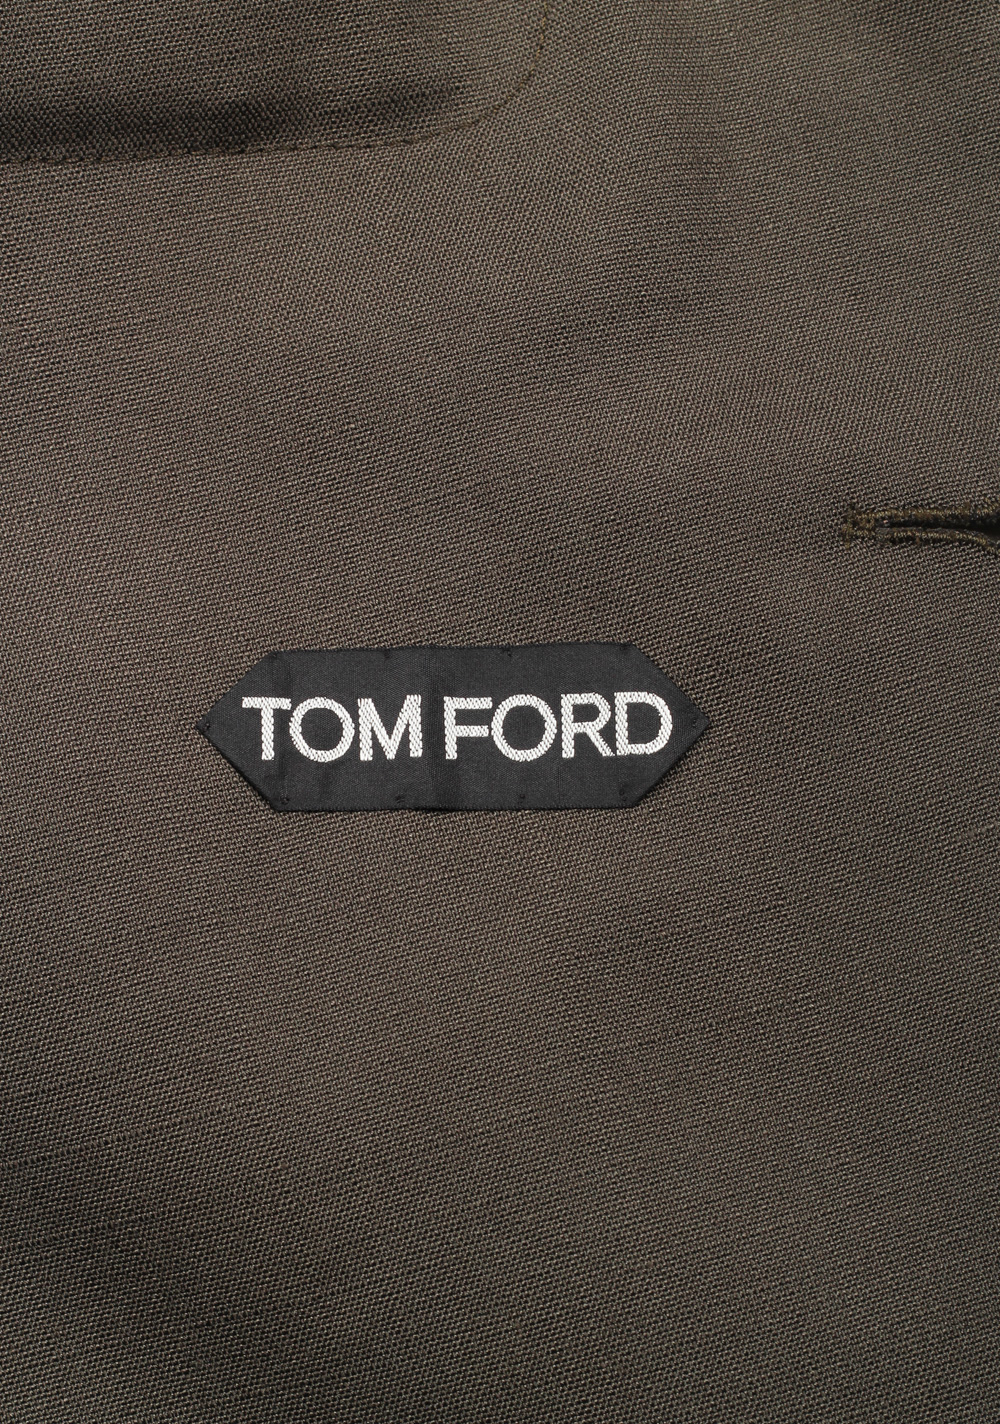 TOM FORD O’Connor Green Sport Coat Size 52 / 42R U.S. Fit Y | Costume Limité